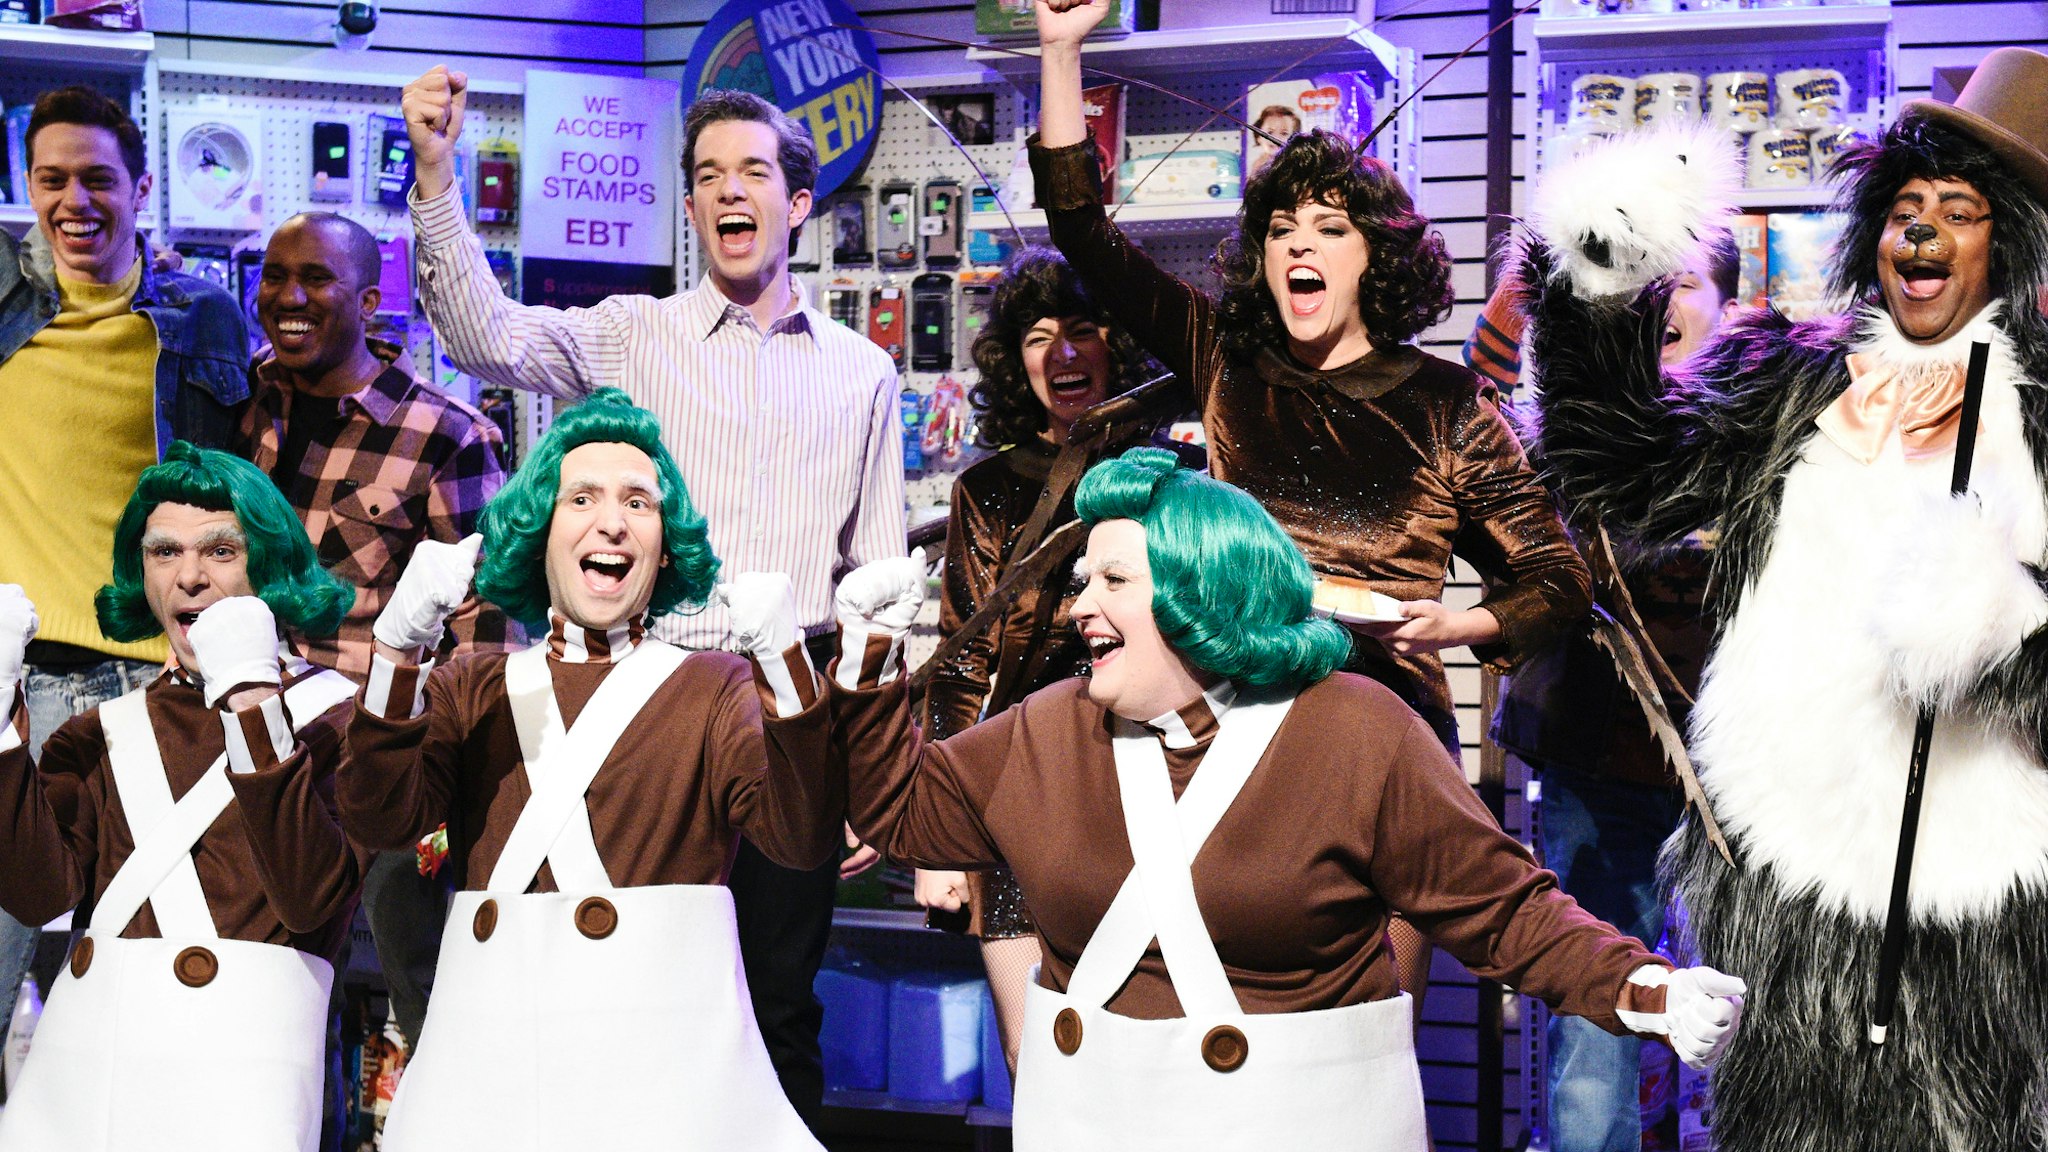 Pete Davidson, Mikey Day, Chris Redd, Kyle Mooney, host John Mulaney, Aidy Bryant, Melissa Villaseñor, Cecily Strong, Beck Bennett, Kenan Thompson as the Bodgea Cat, and Kate McKinnon during the "Bodega Bathroom" sketch on Saturday, March 2, 2019.